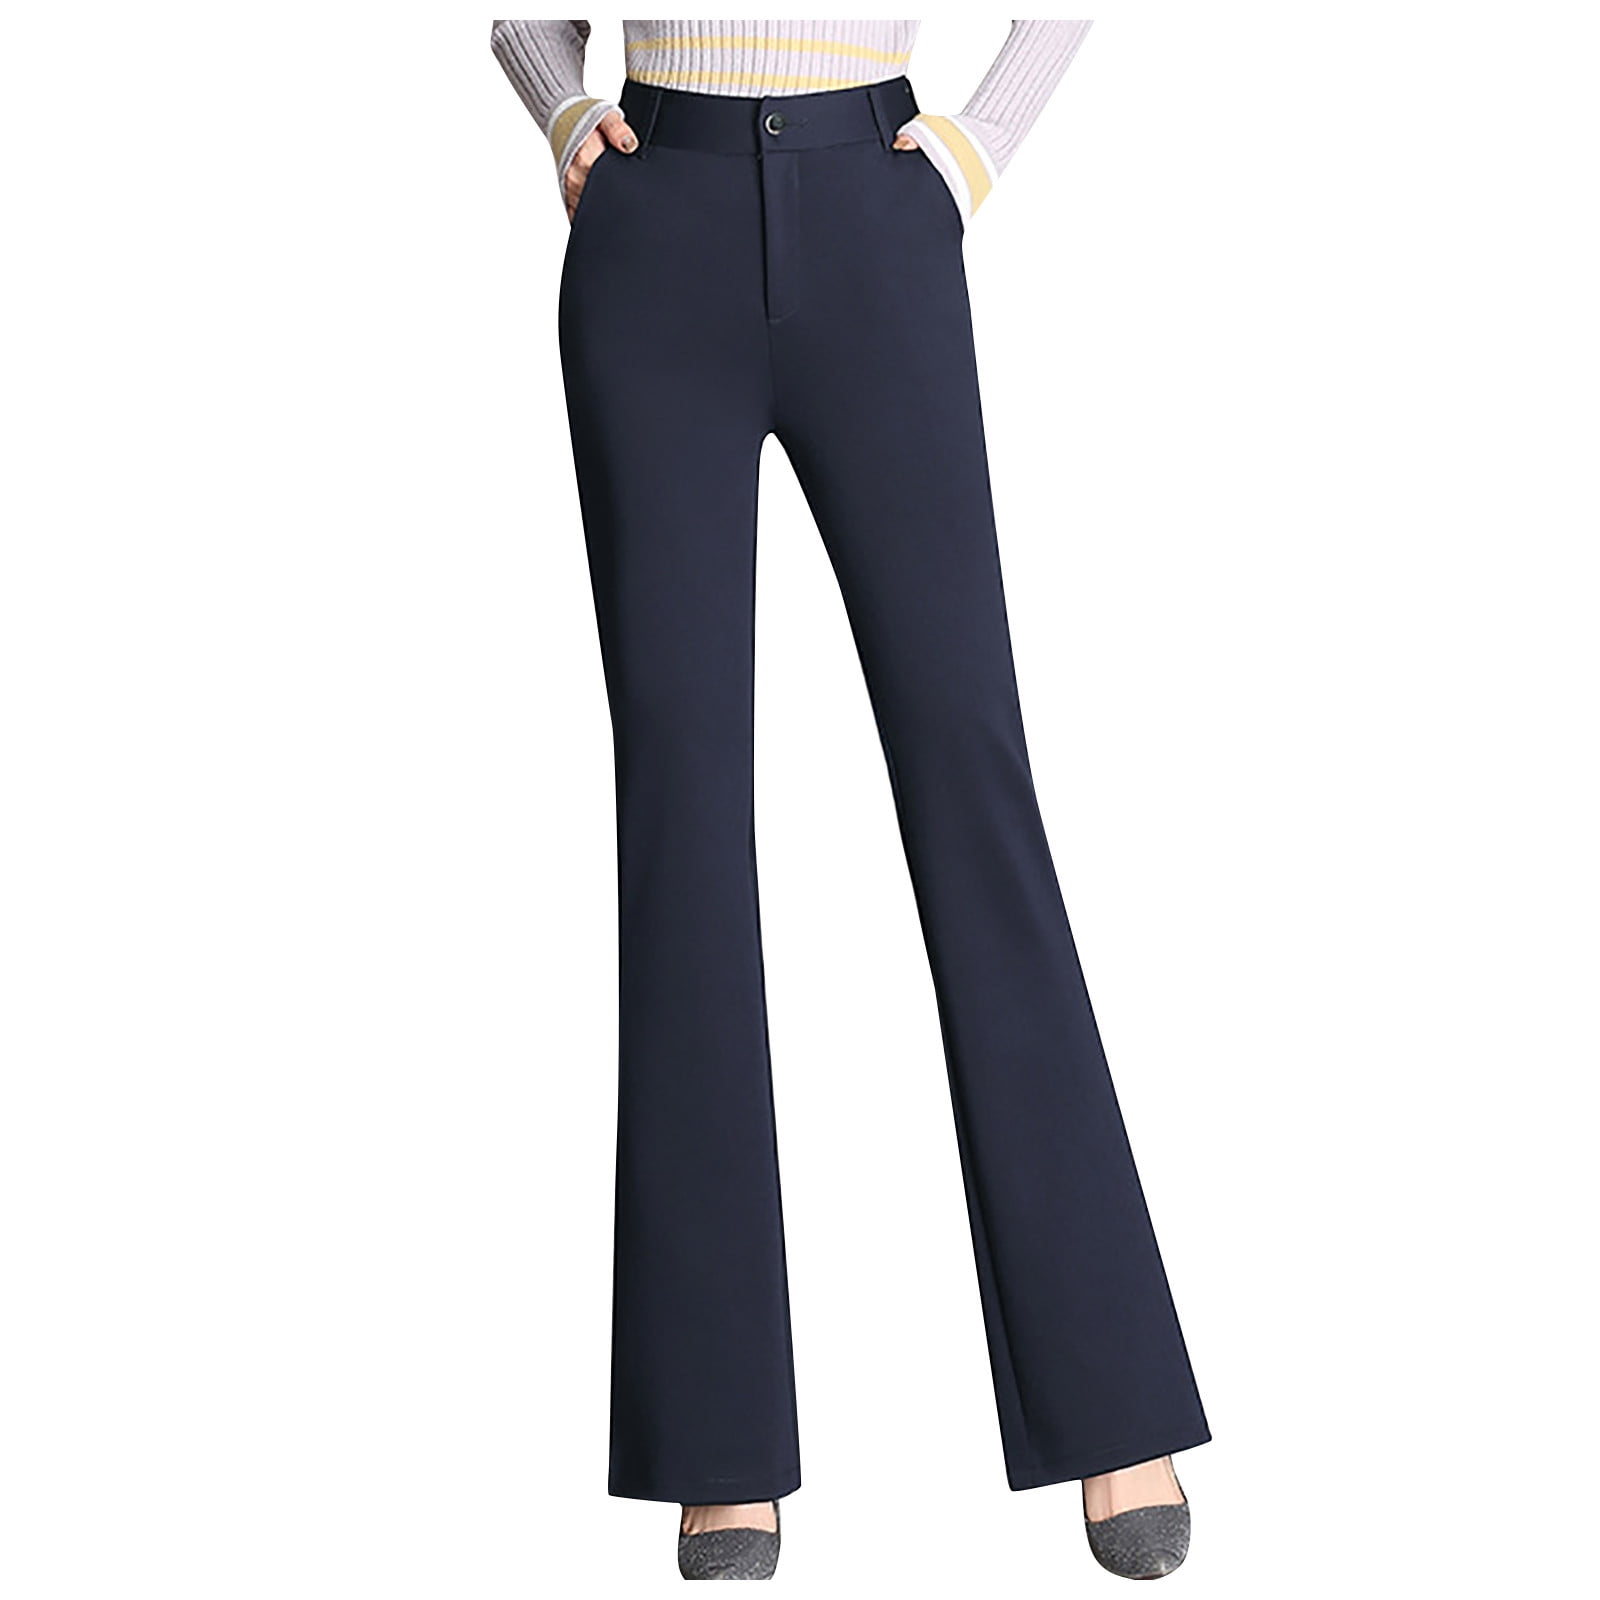 HSMQHJWE Empire Pants Pants Suits For Women Business Casual Pants Trousers  Flared Straight-Leg Long Pockets Women High Solid Waist Pants Pants Express  Pants For Women Slim Fit 